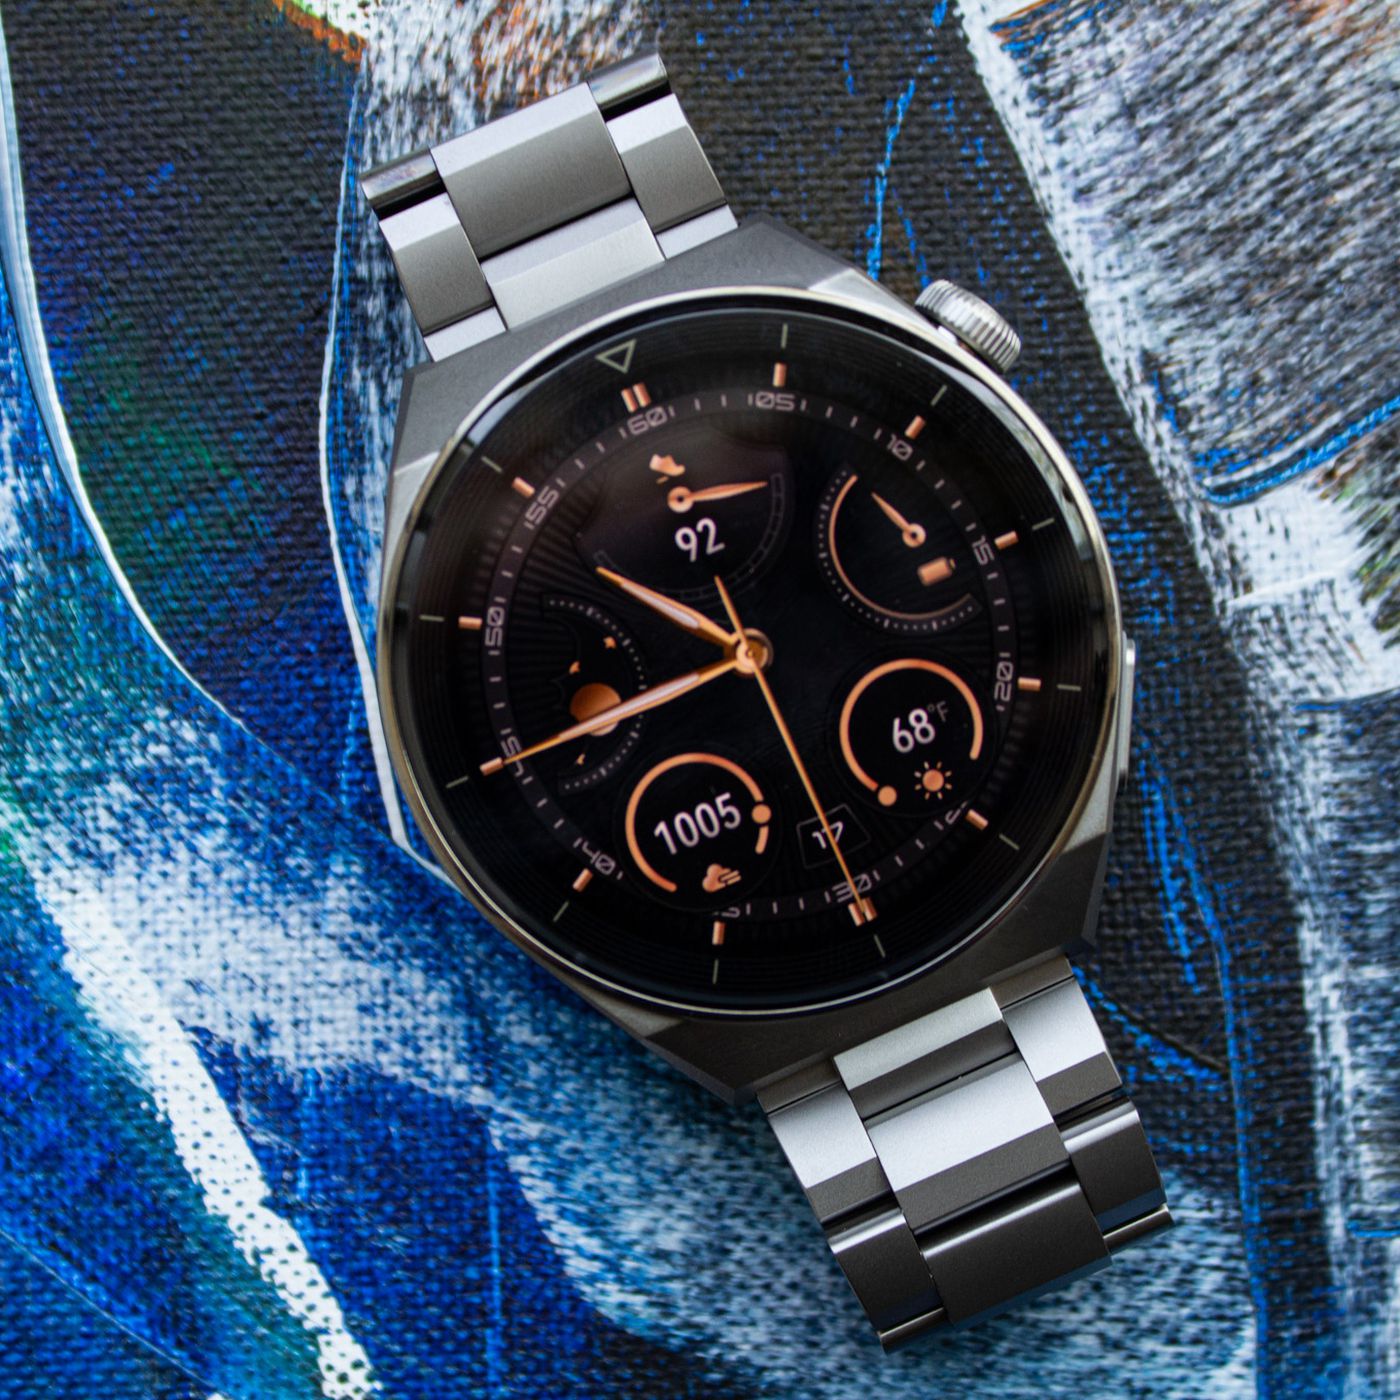 The Huawei Watch GT 3 Pro is a nice smartwatch many of us can't